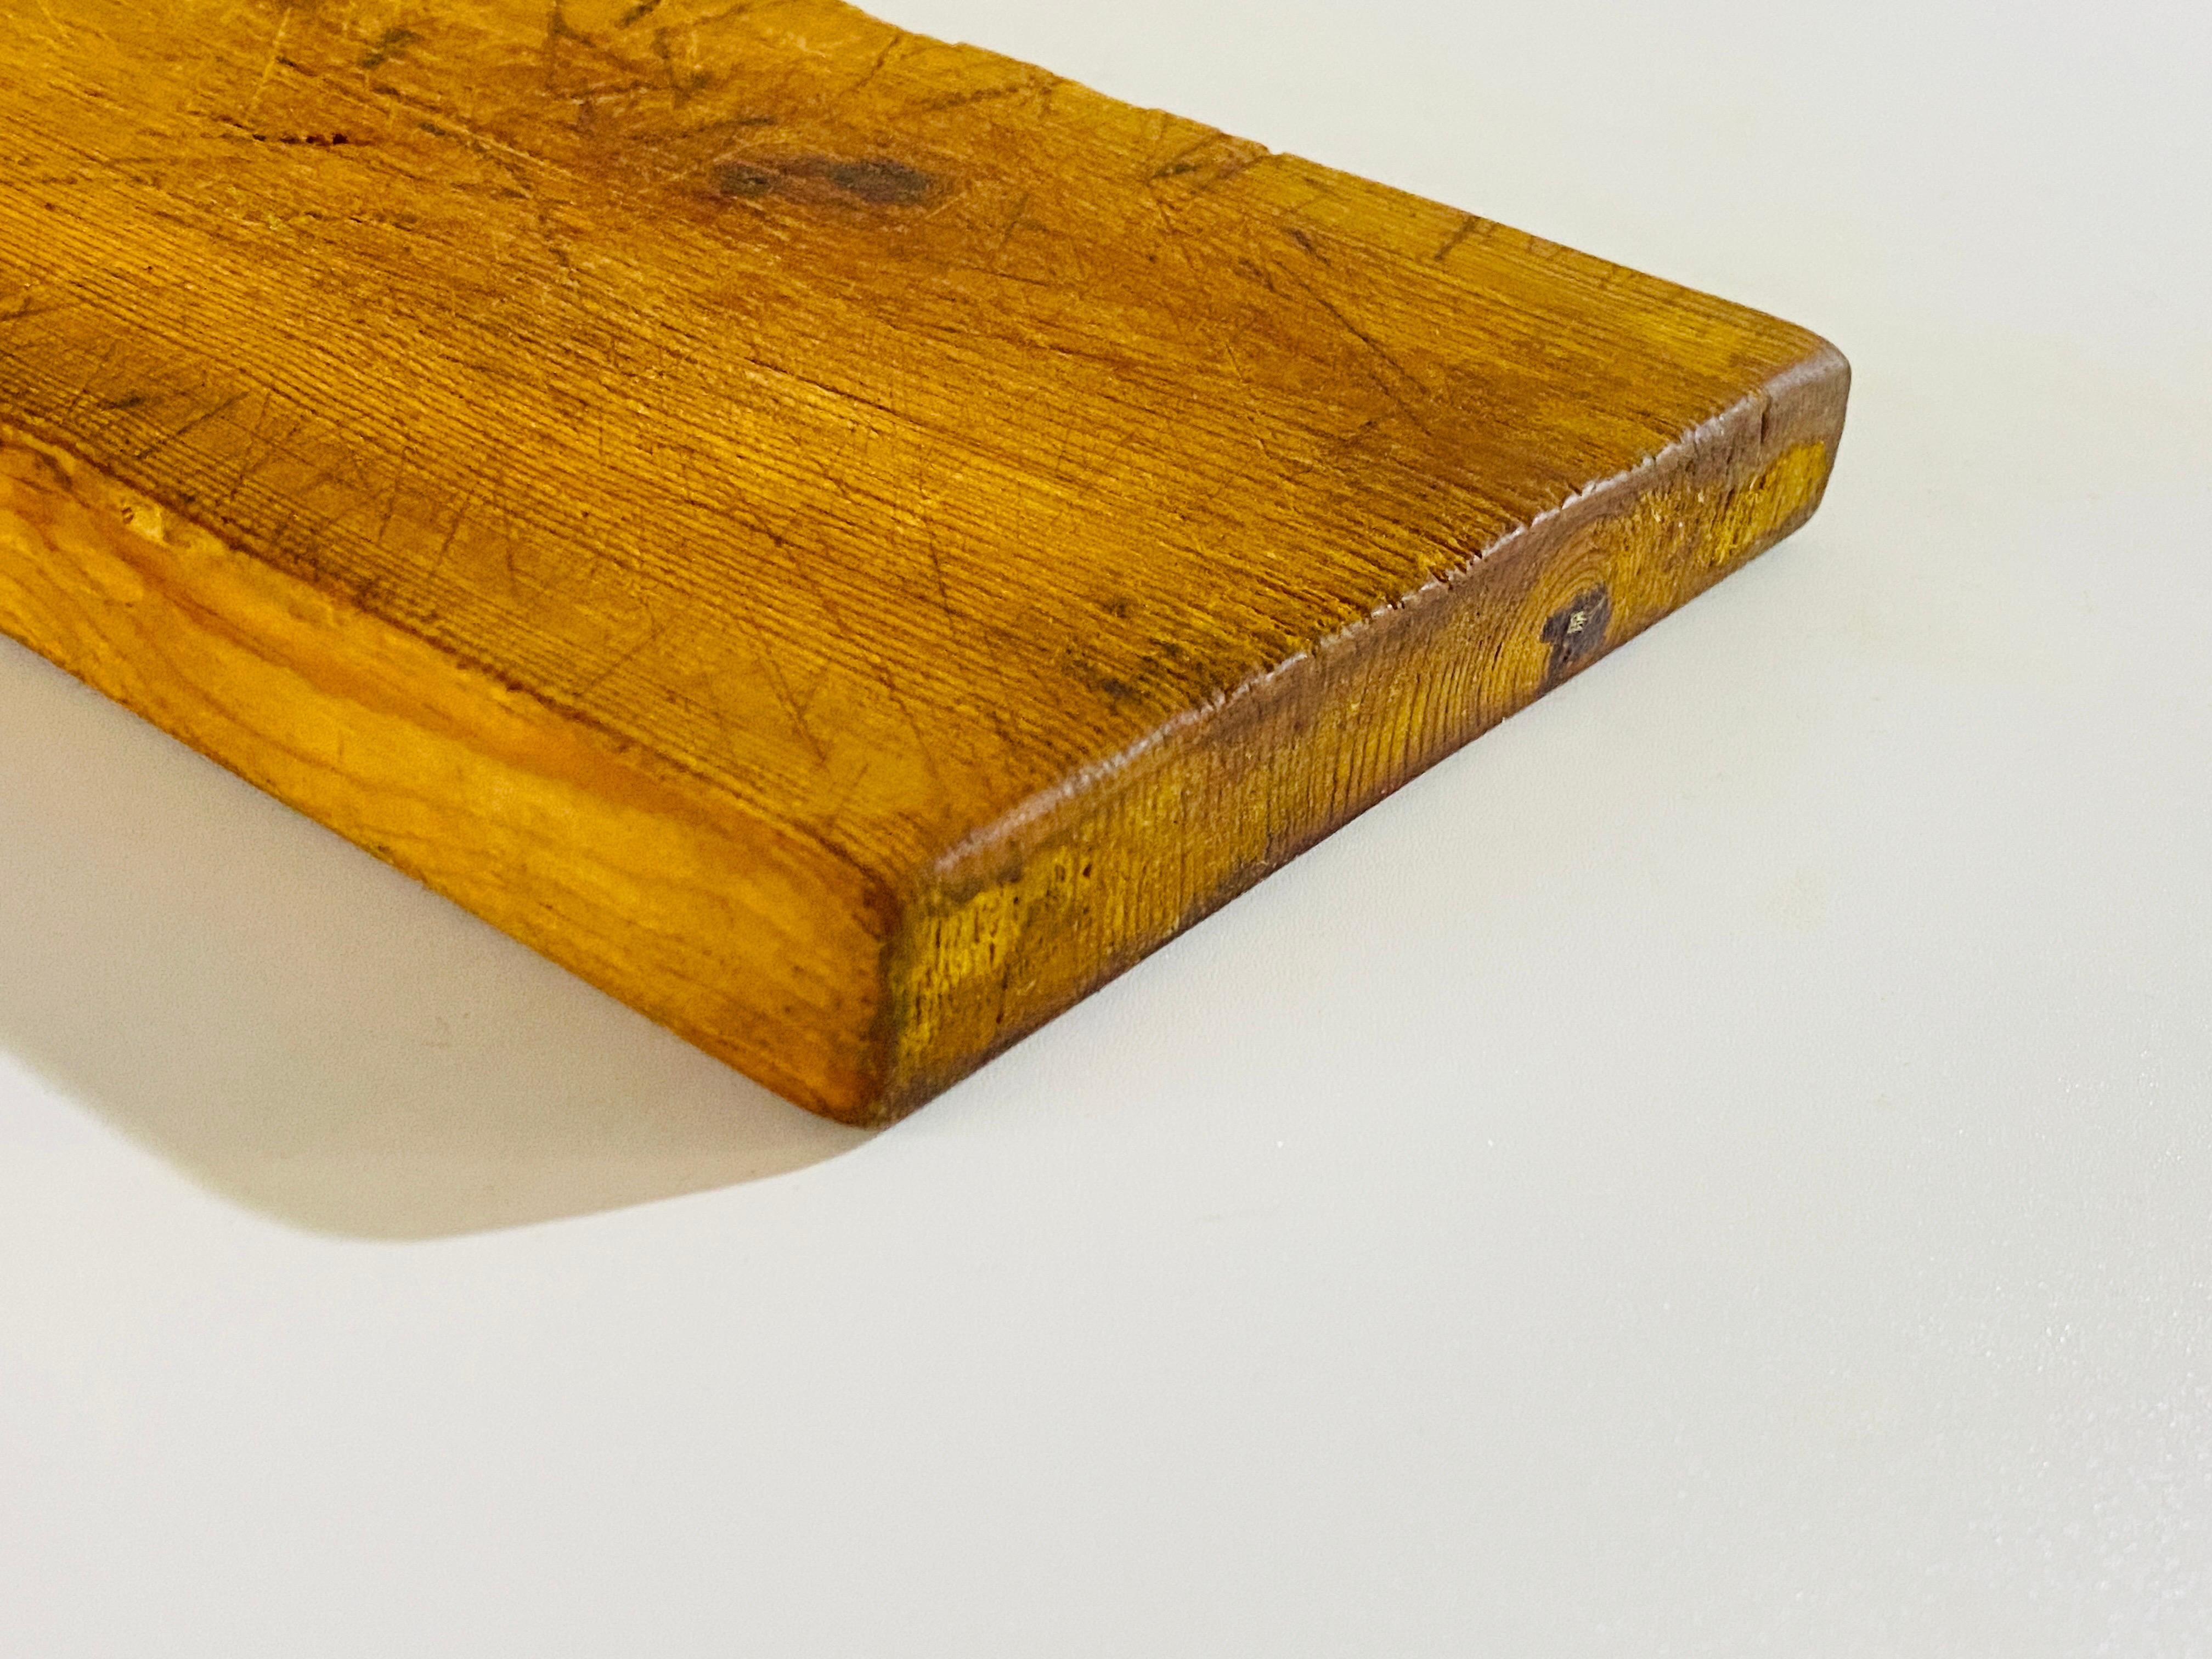 Patinated Wooden Chopping or Cutting Board Old Patina, Brown Color, French, 20th Century For Sale